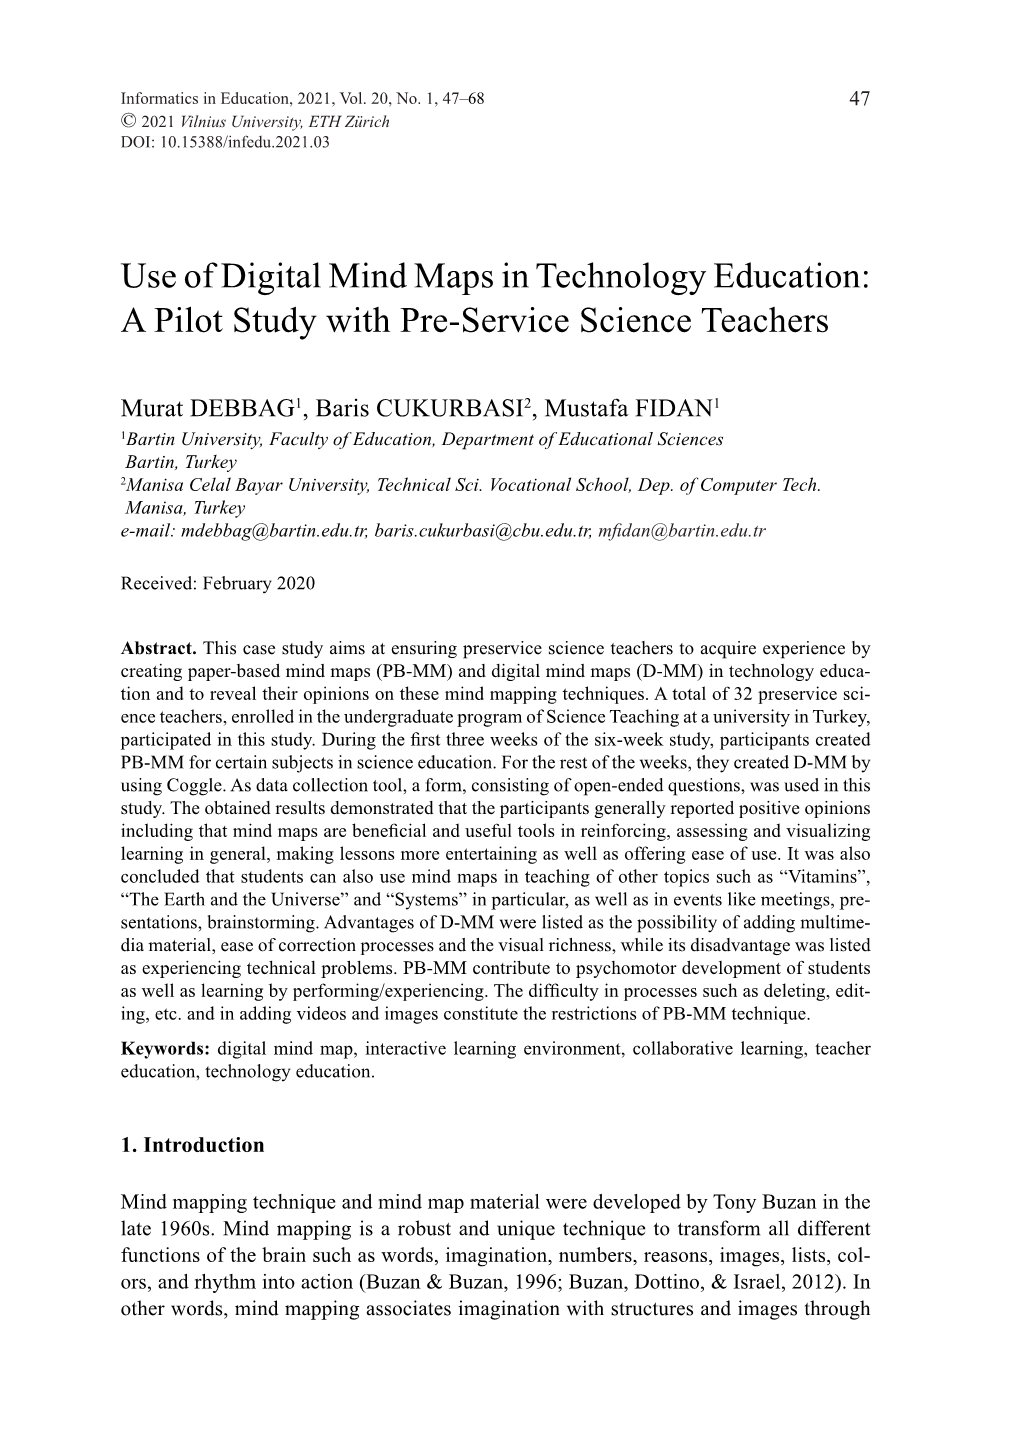 Use of Digital Mind Maps in Technology Education: a Pilot Study with Pre-Service Science Teachers